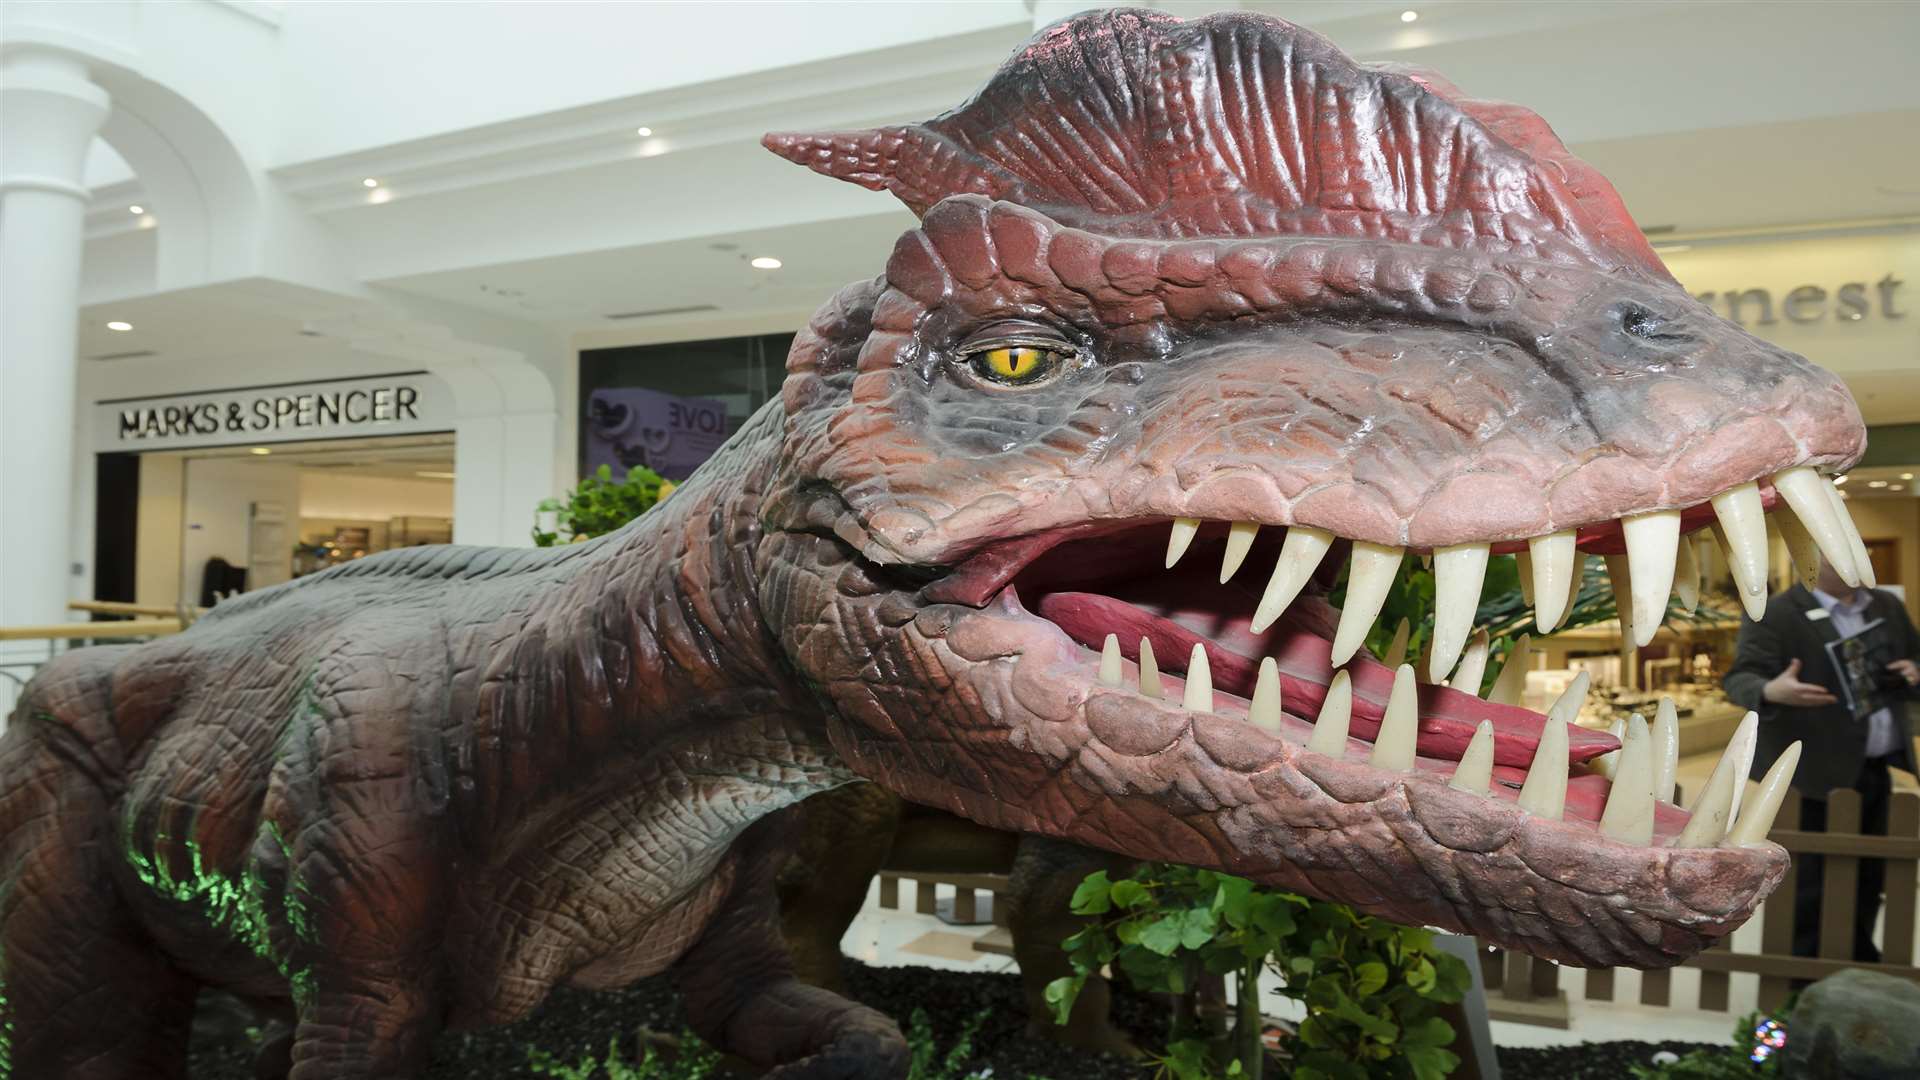 The Dilophosaurus at Royal Victoria Place in Tunbridge Wells